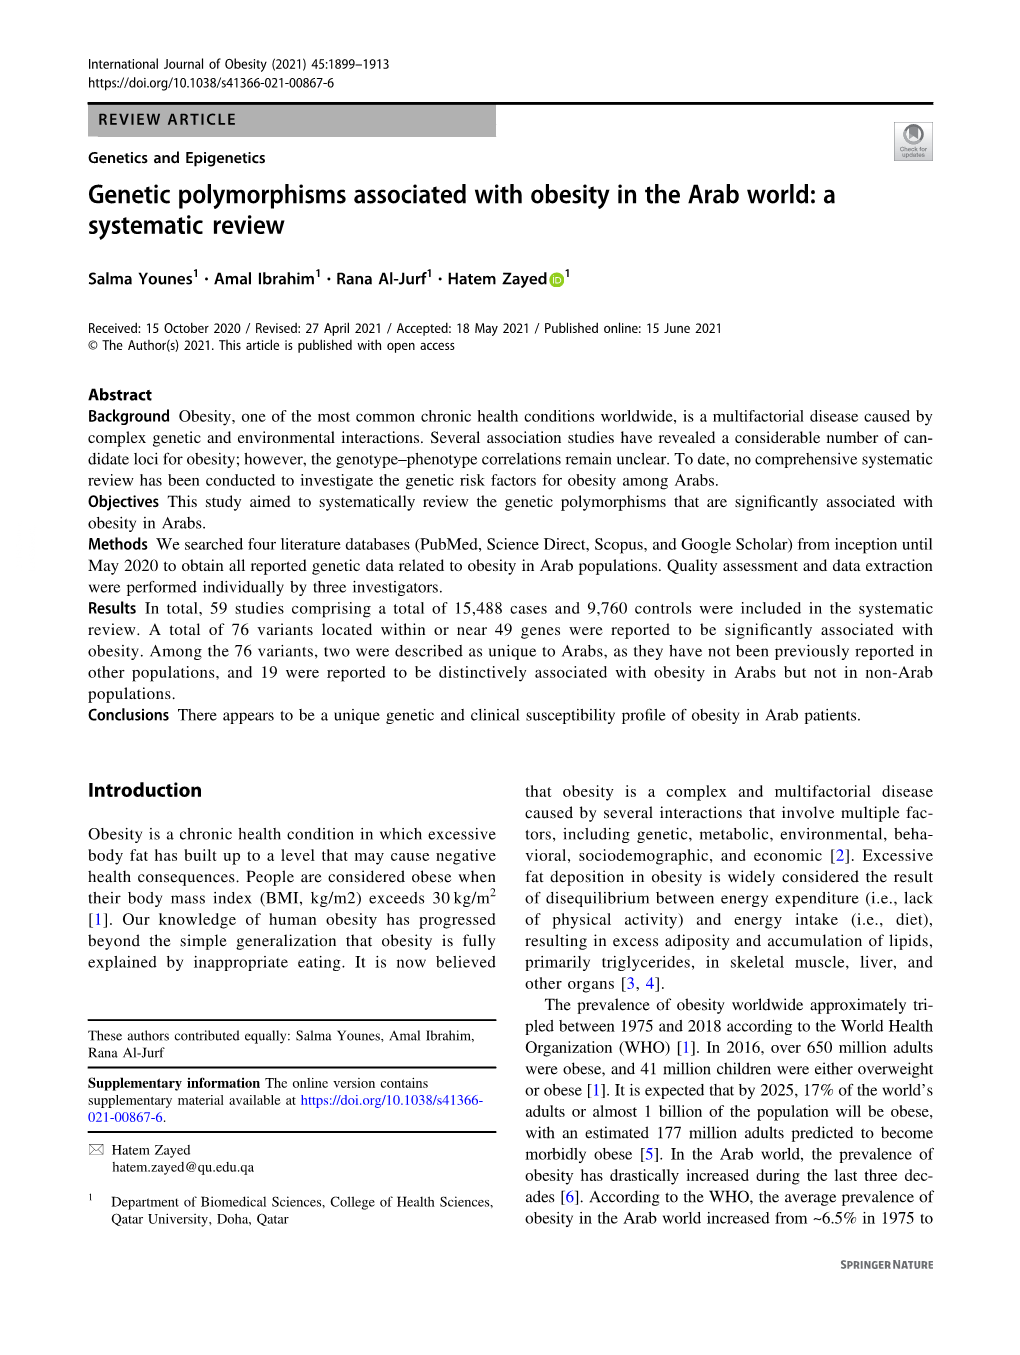 Genetic Polymorphisms Associated with Obesity in the Arab World: a Systematic Review